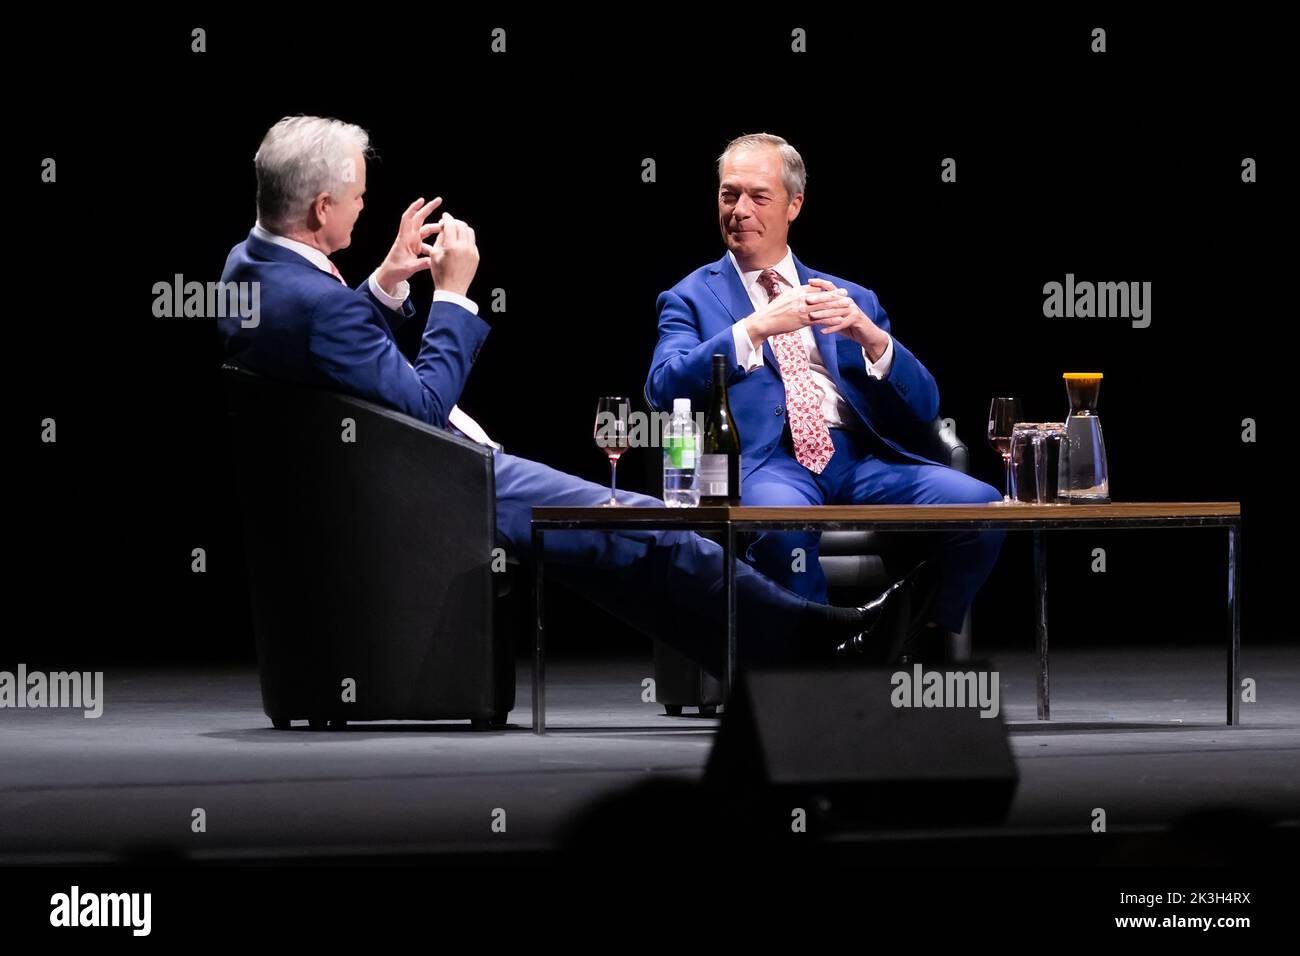 Melbourne, Australia, 26 September, 2022. Nigel Farage and Ross Cameron take questions from a sold out audience during An Evening With Nigel Farage at The Melbourne Convention and Exhibition Centre on September 26, 2022 in Melbourne, Australia. Credit: Dave Hewison/Speed Media/Alamy Live News Stock Photo